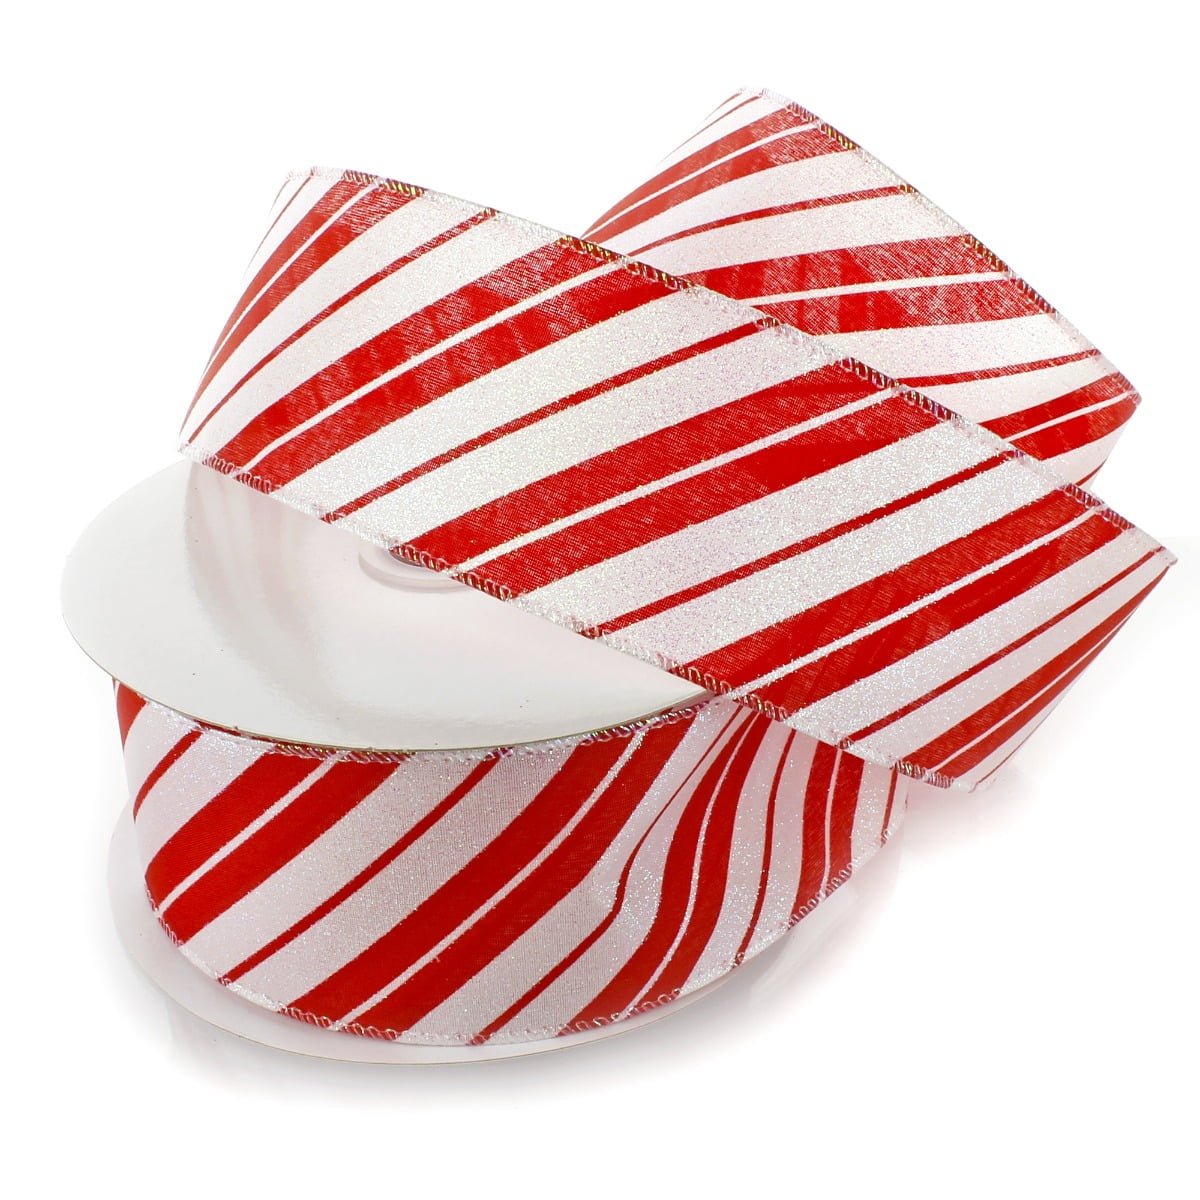 Candy cane stripe ribbon in red and white printed on 7/8 white single face  satin, 10 yards